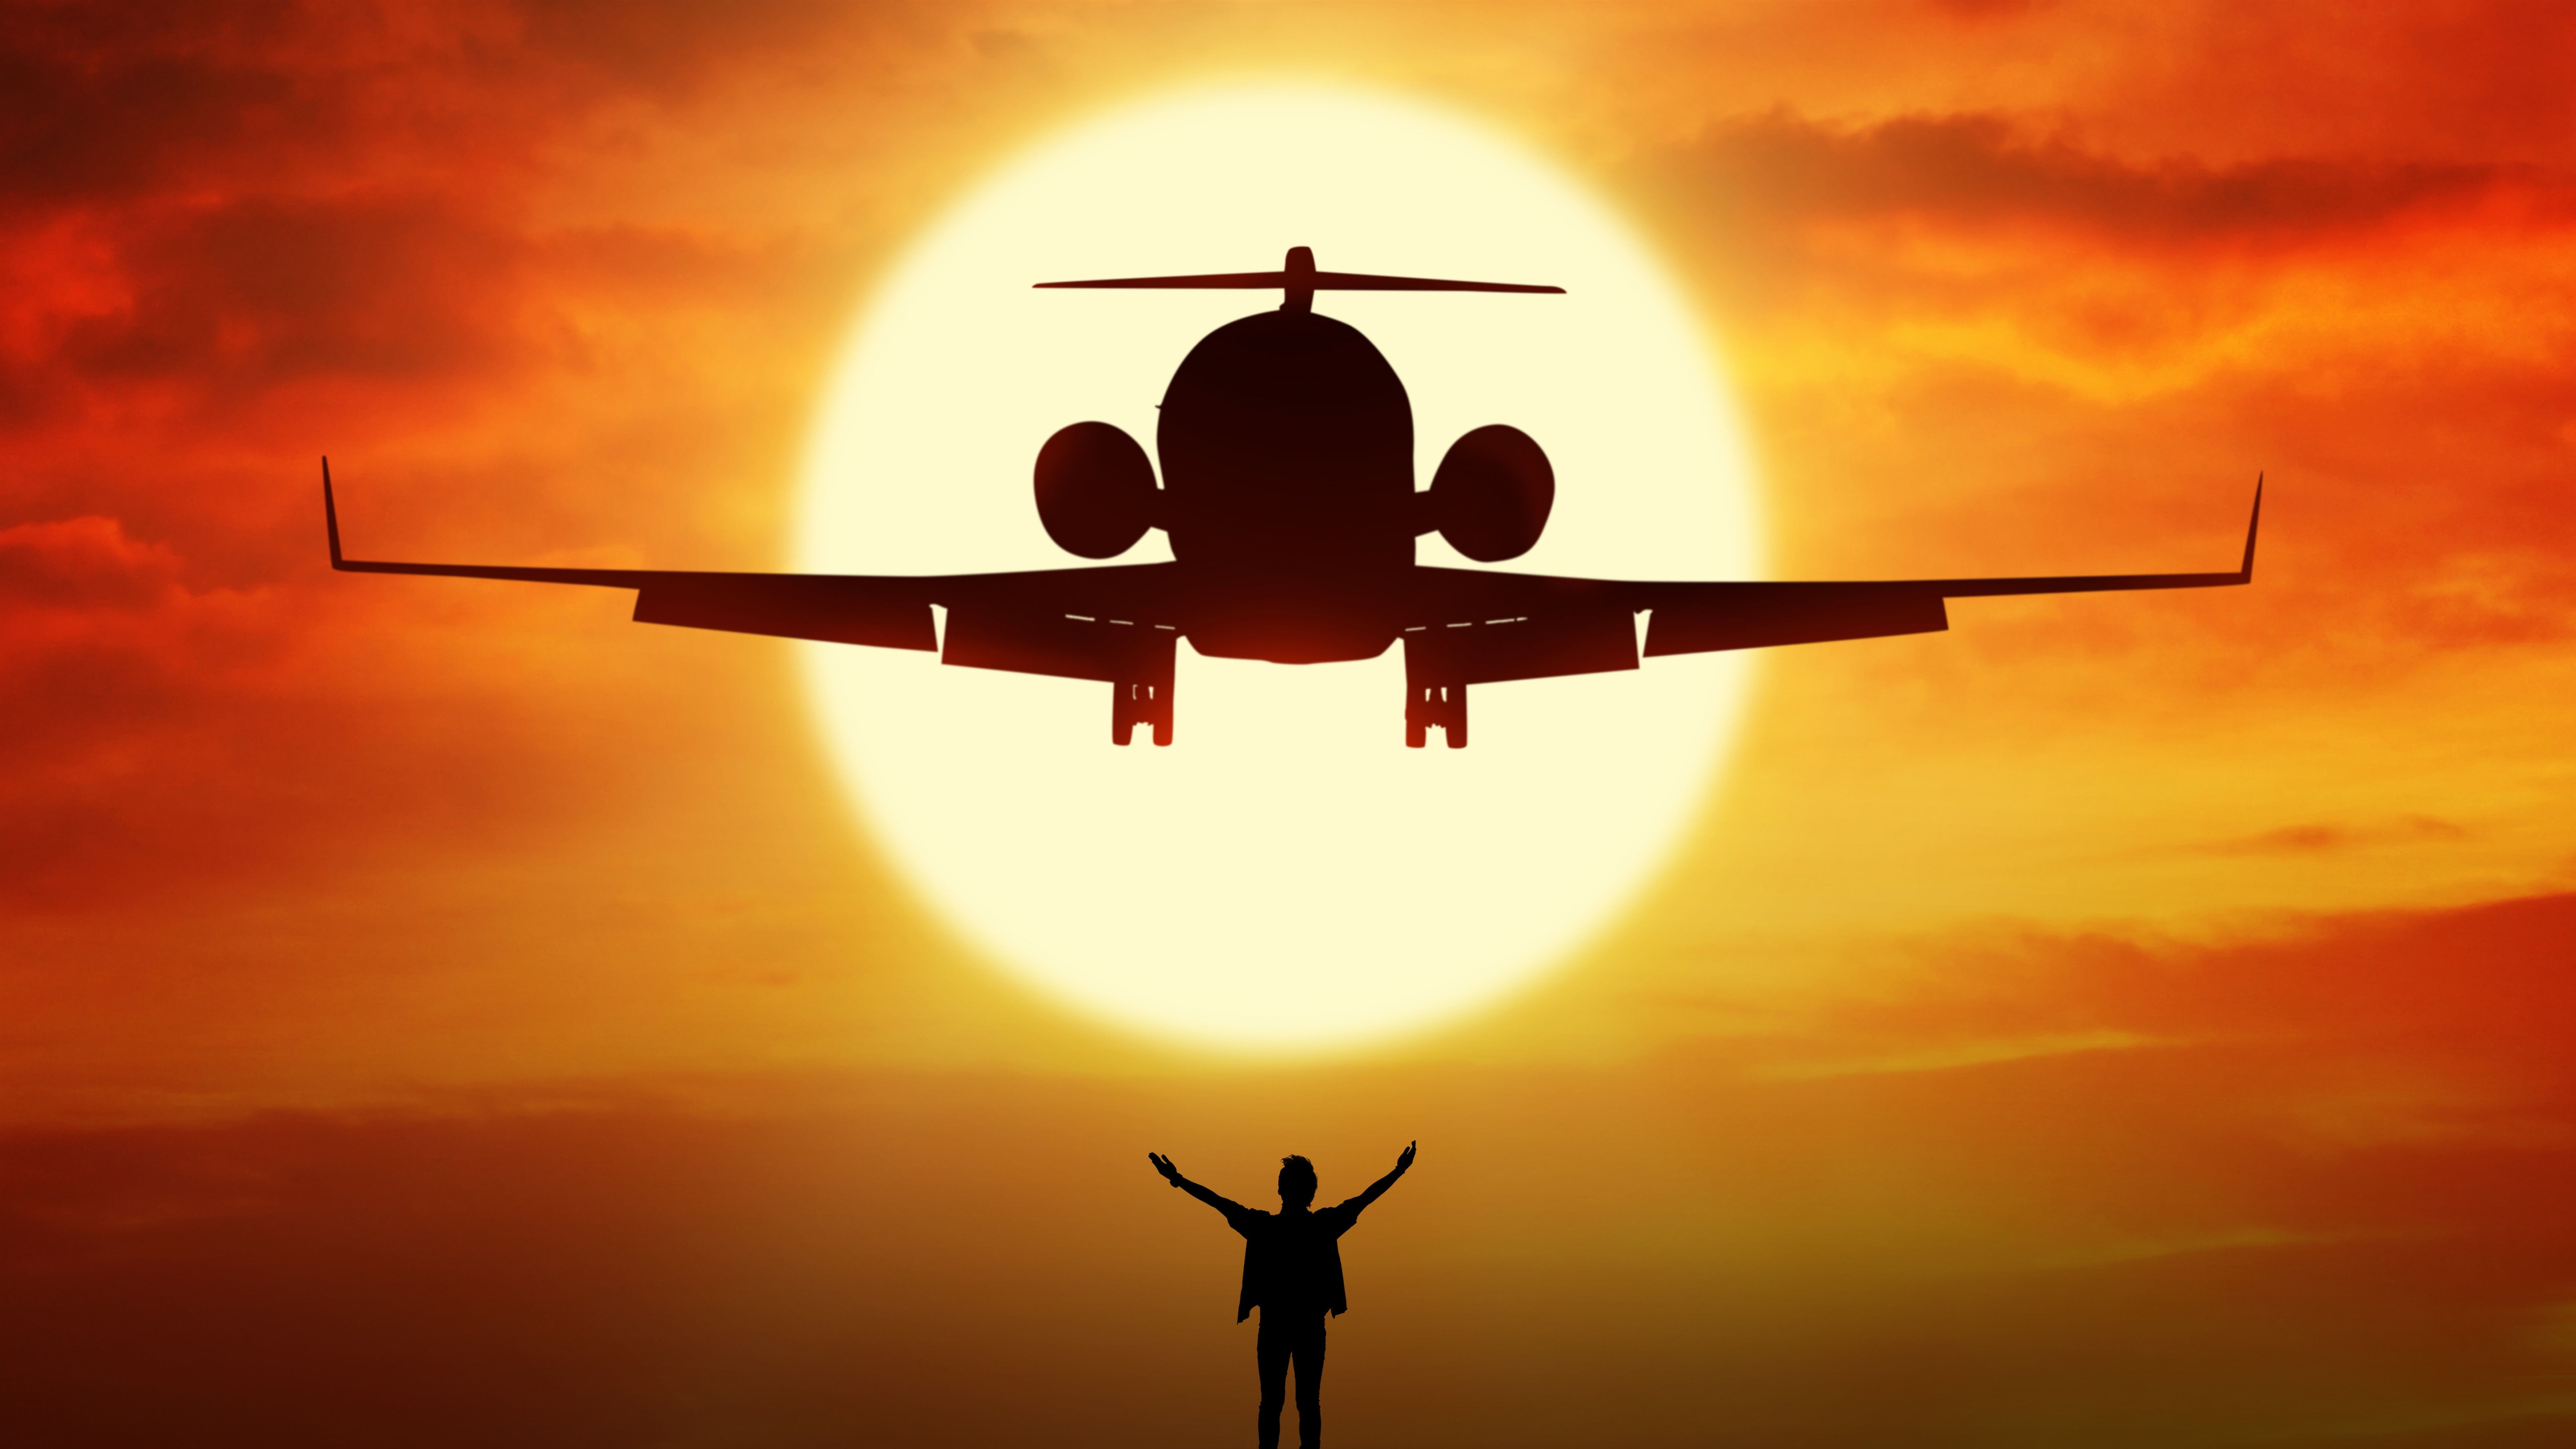 Wallpaper Airplane and man, silhouette, sunset, sun 7680x4320 UHD 8K Picture, Image